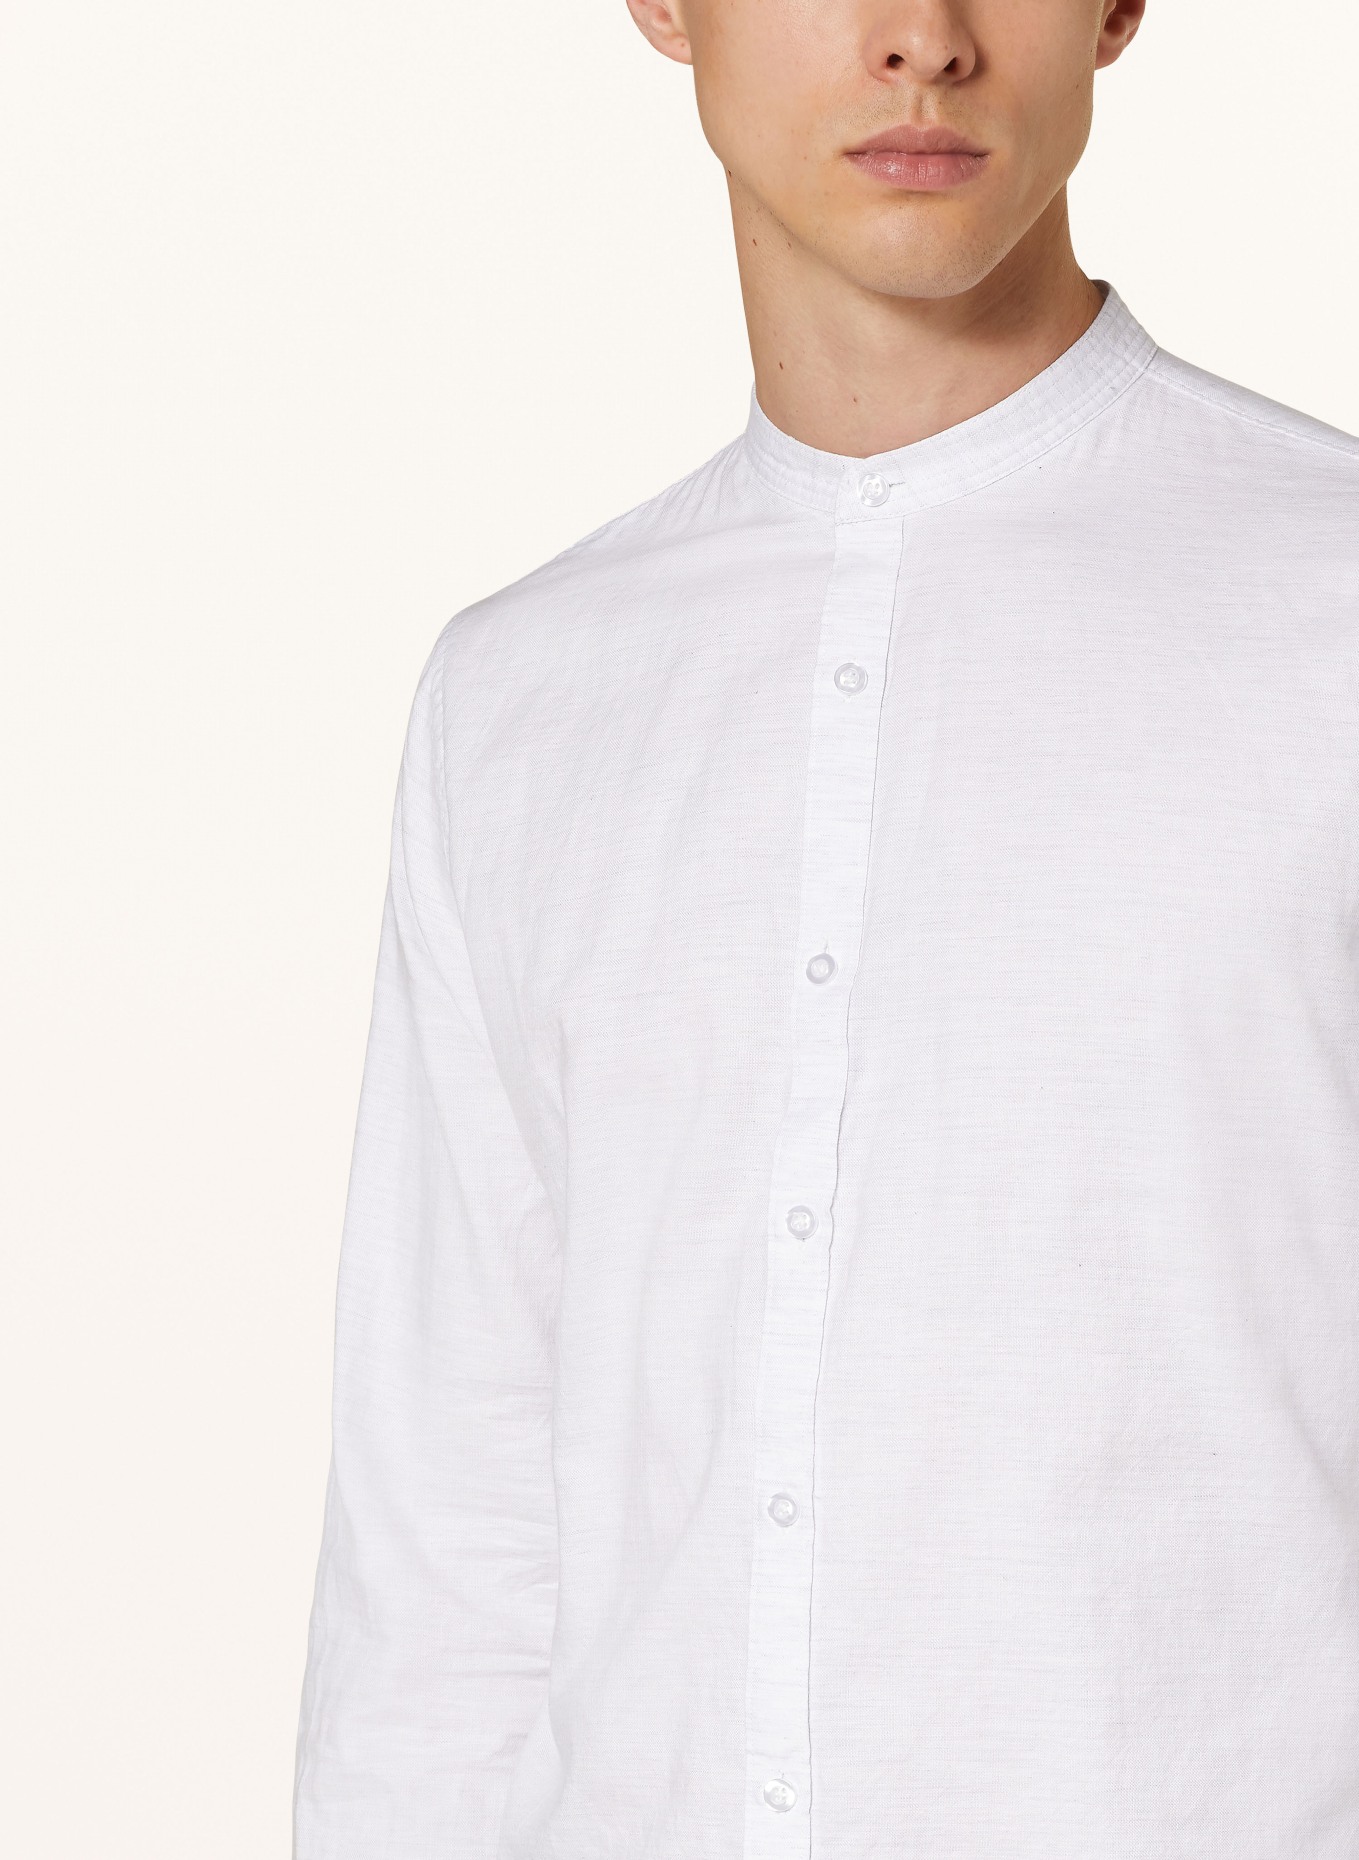 NOWADAYS Shirt regular fit with stand-up collar, Color: LIGHT GRAY (Image 4)